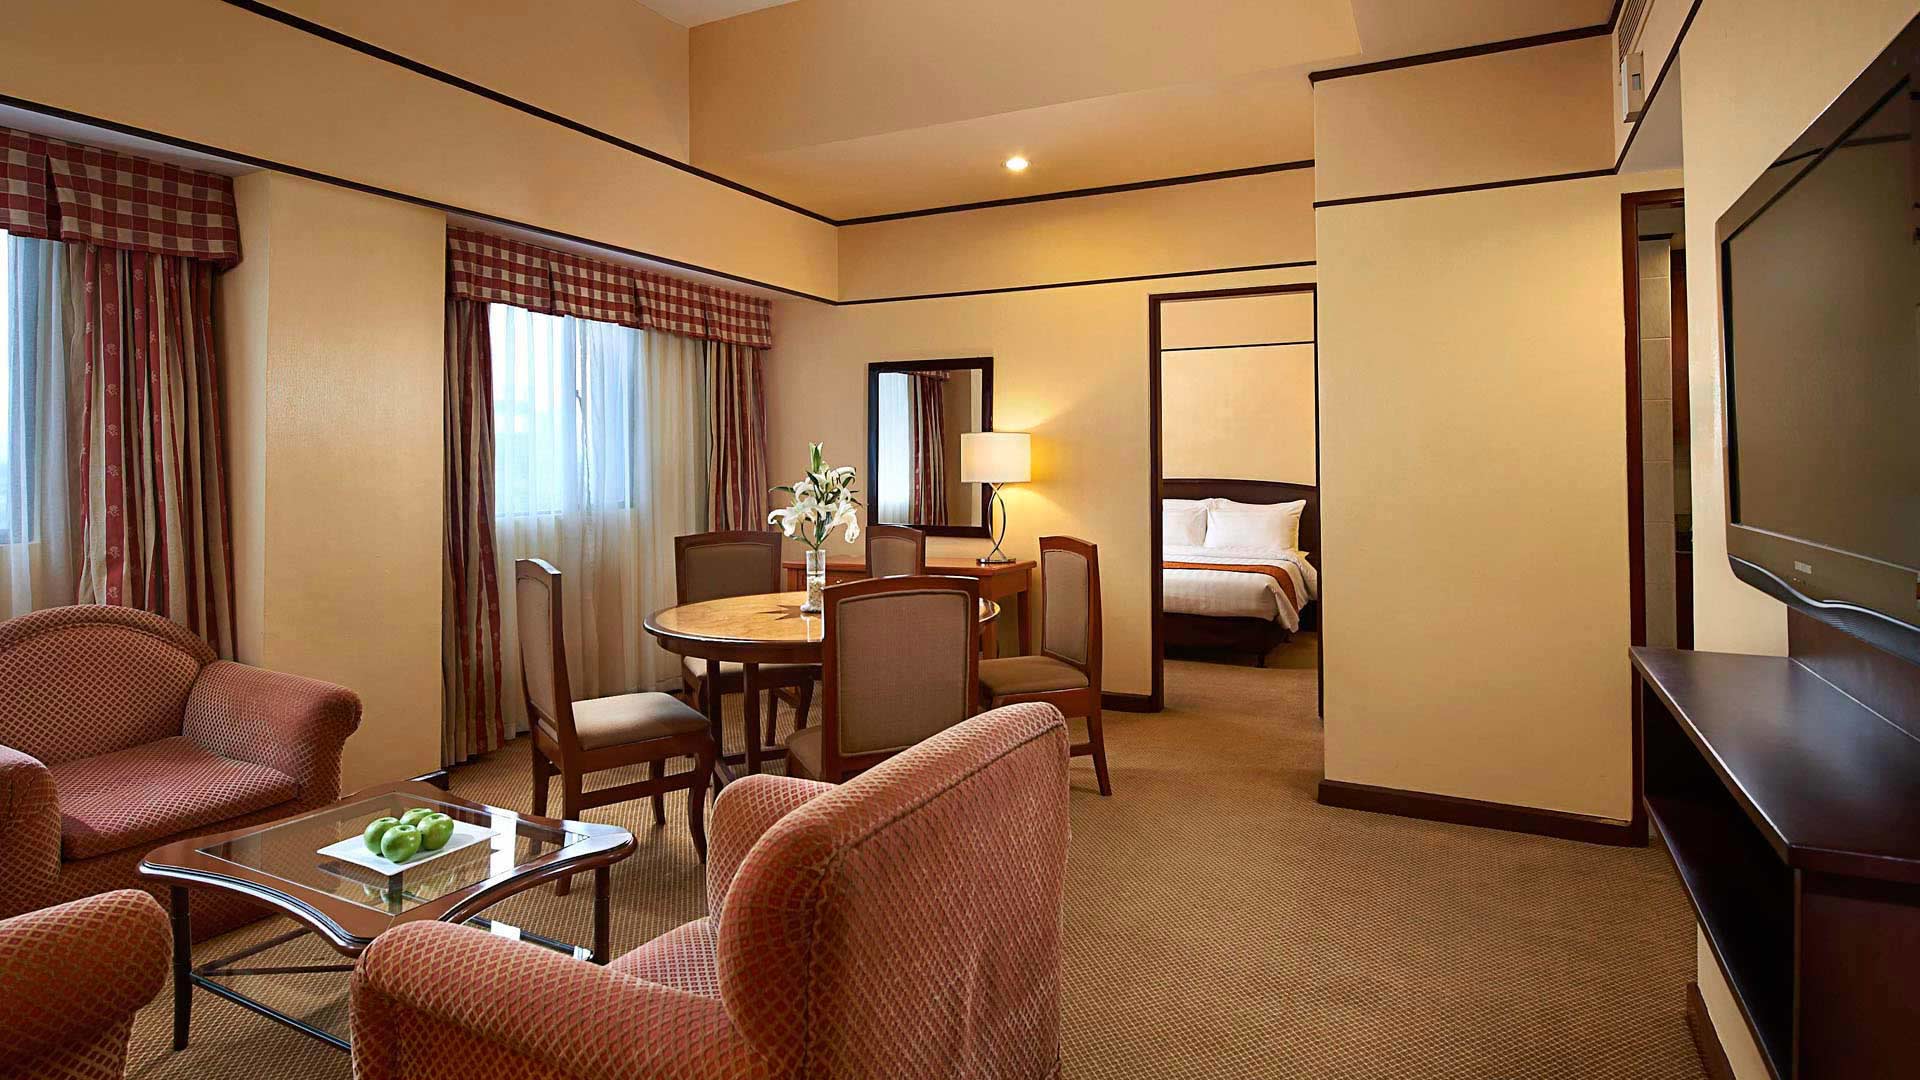 CHERRY BLOSSOMS HOTEL MANILA - NO RESERVATION COSTS - BOOK & SAVE